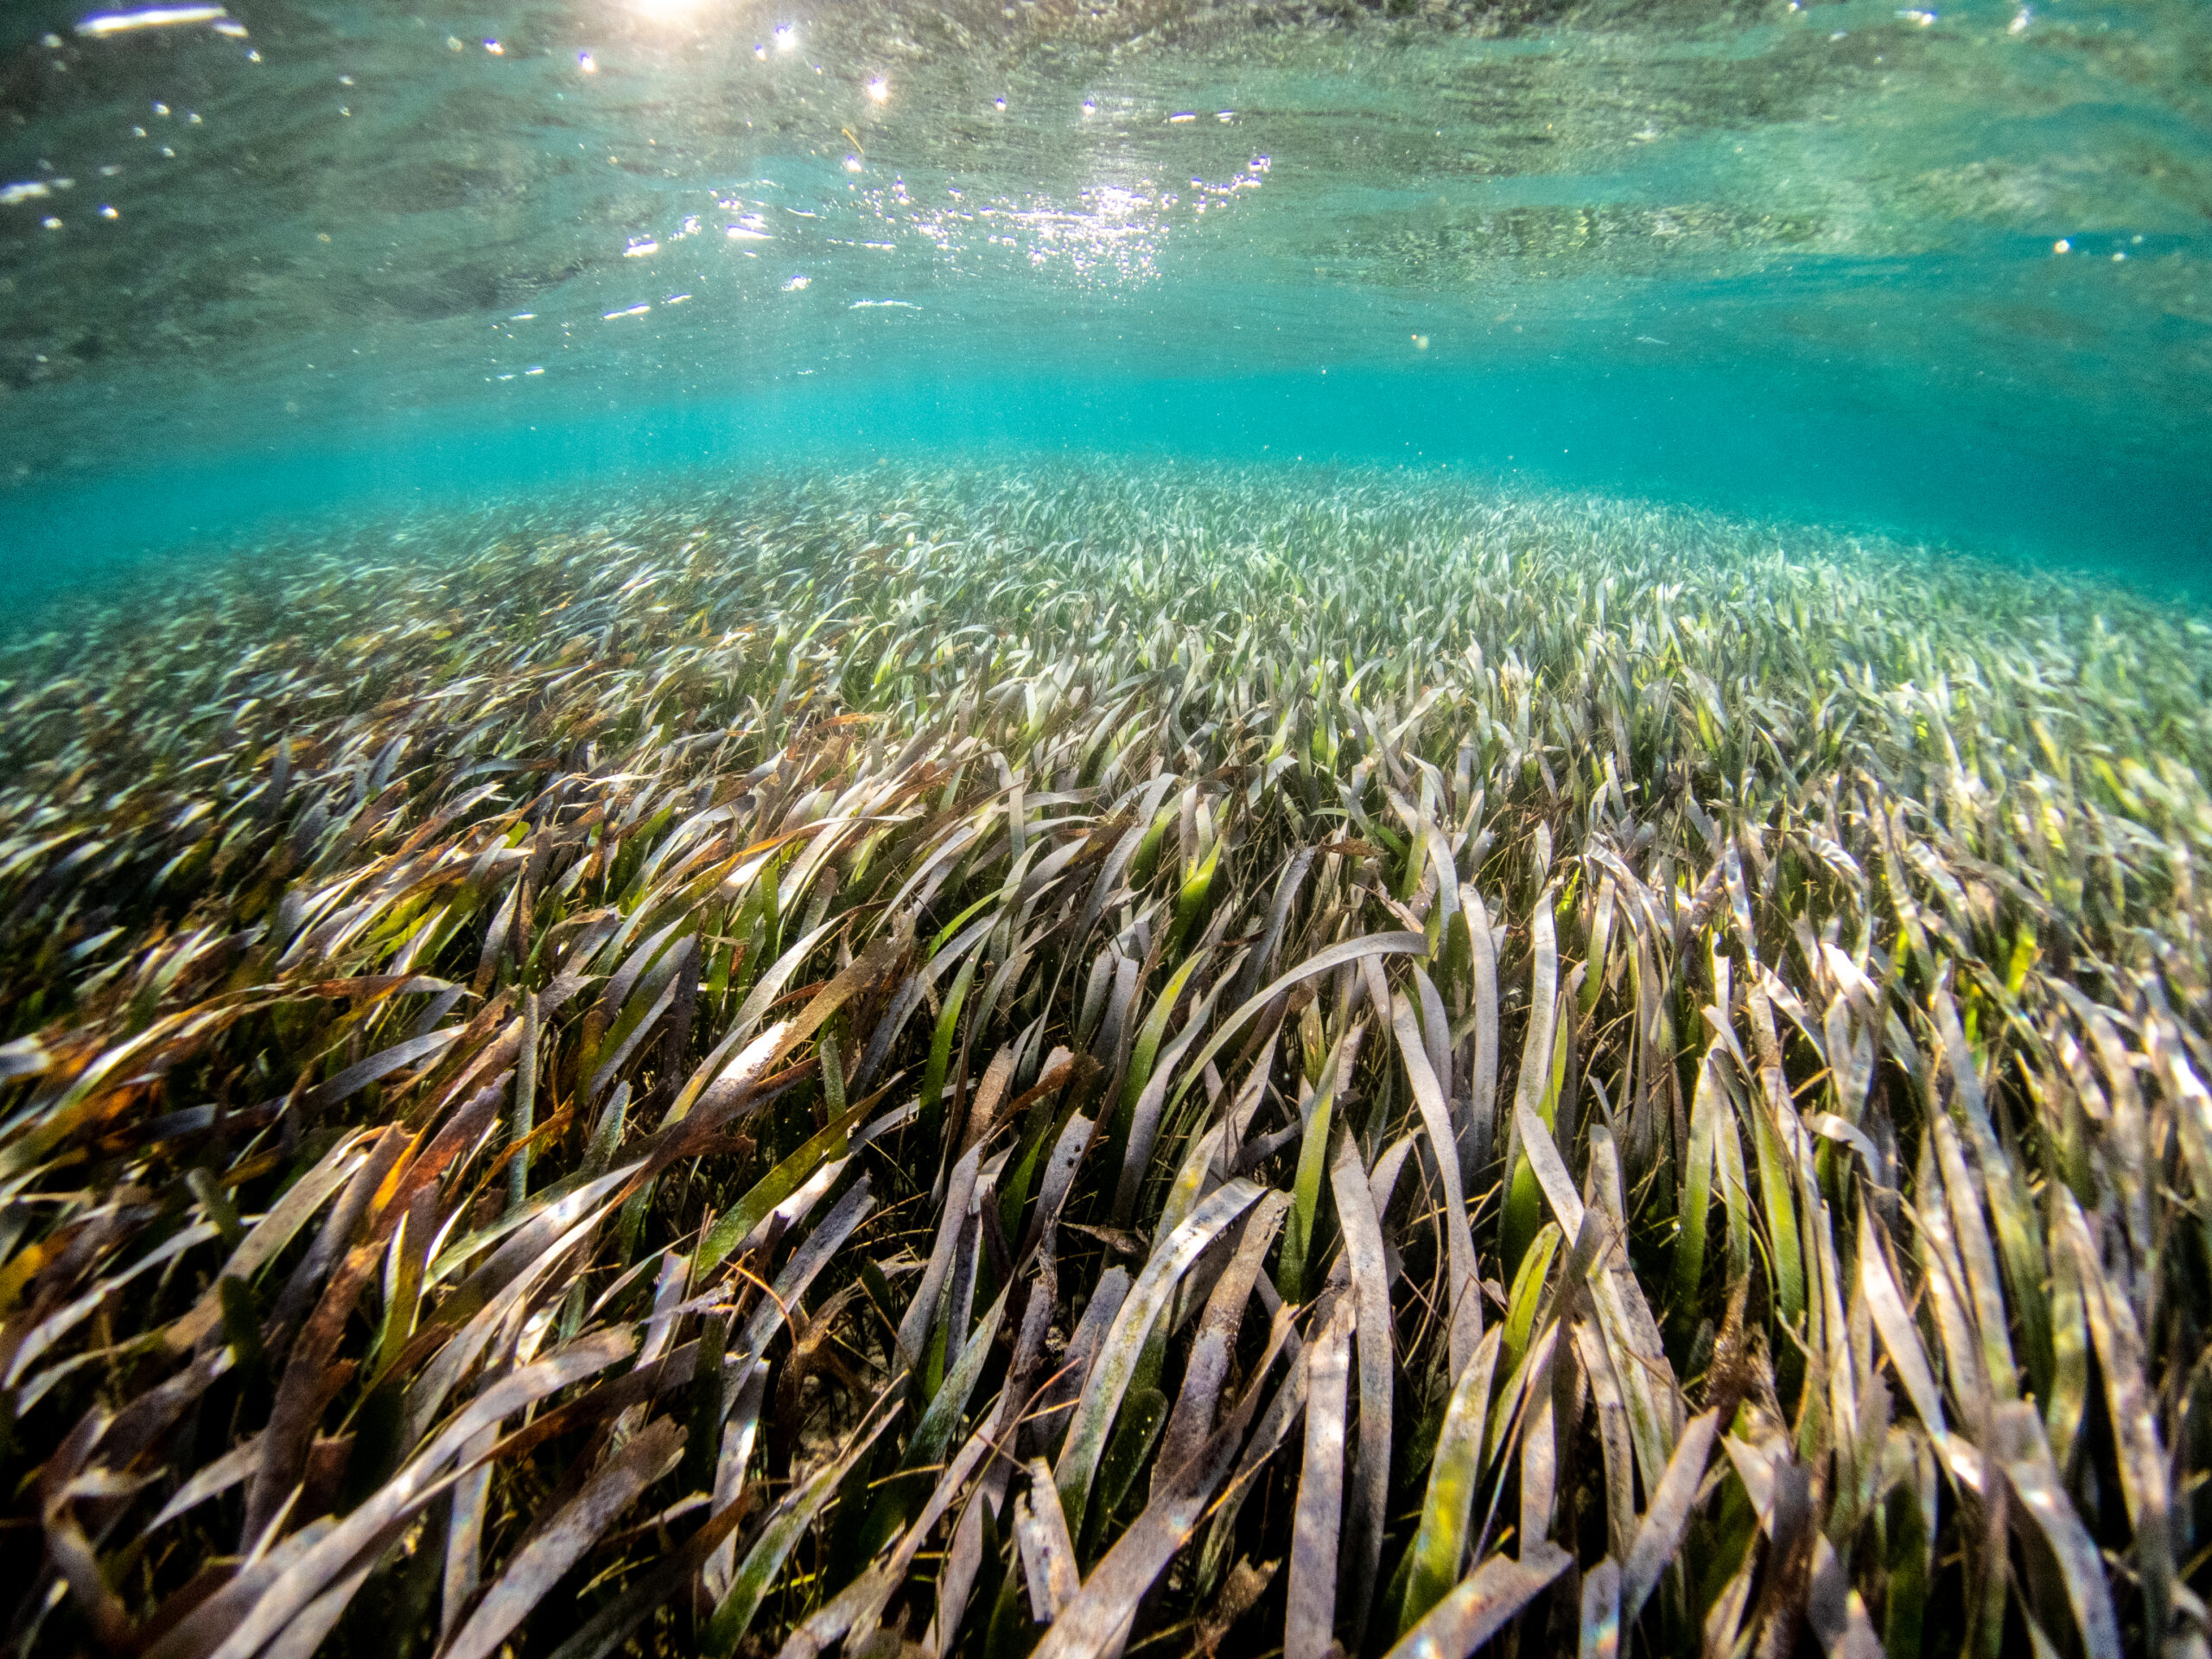 Seagrass meadows show resilience to ‘bounce back’ after die-offs